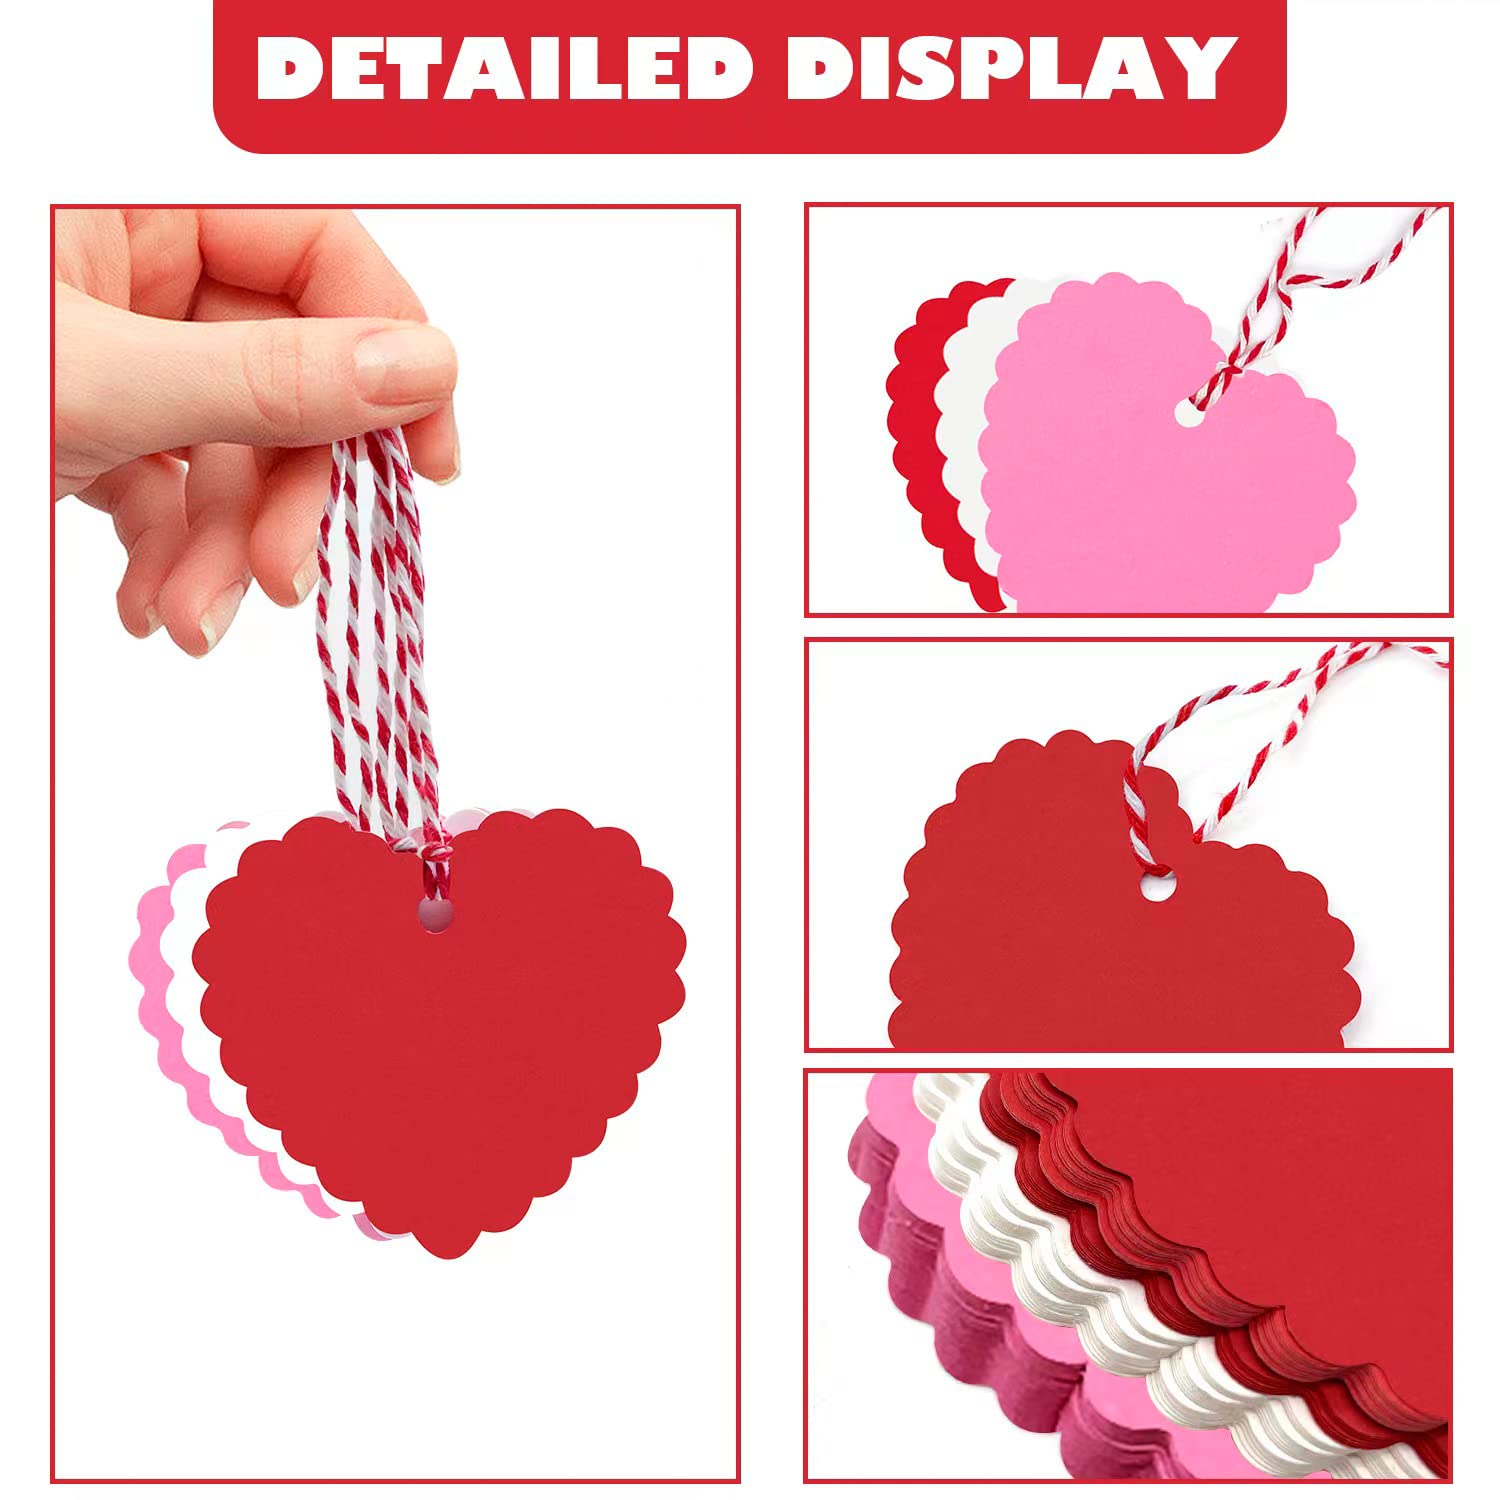 XIANMU 300 Pcs Valentines Day Heart Tags Hang Tag Kraft Paper Gift Tags Heart Shape with 328 Feet String for Valentine's Day Wedding Mother's Day Thanksgiving Party DIY Wrapping - Red Pink White